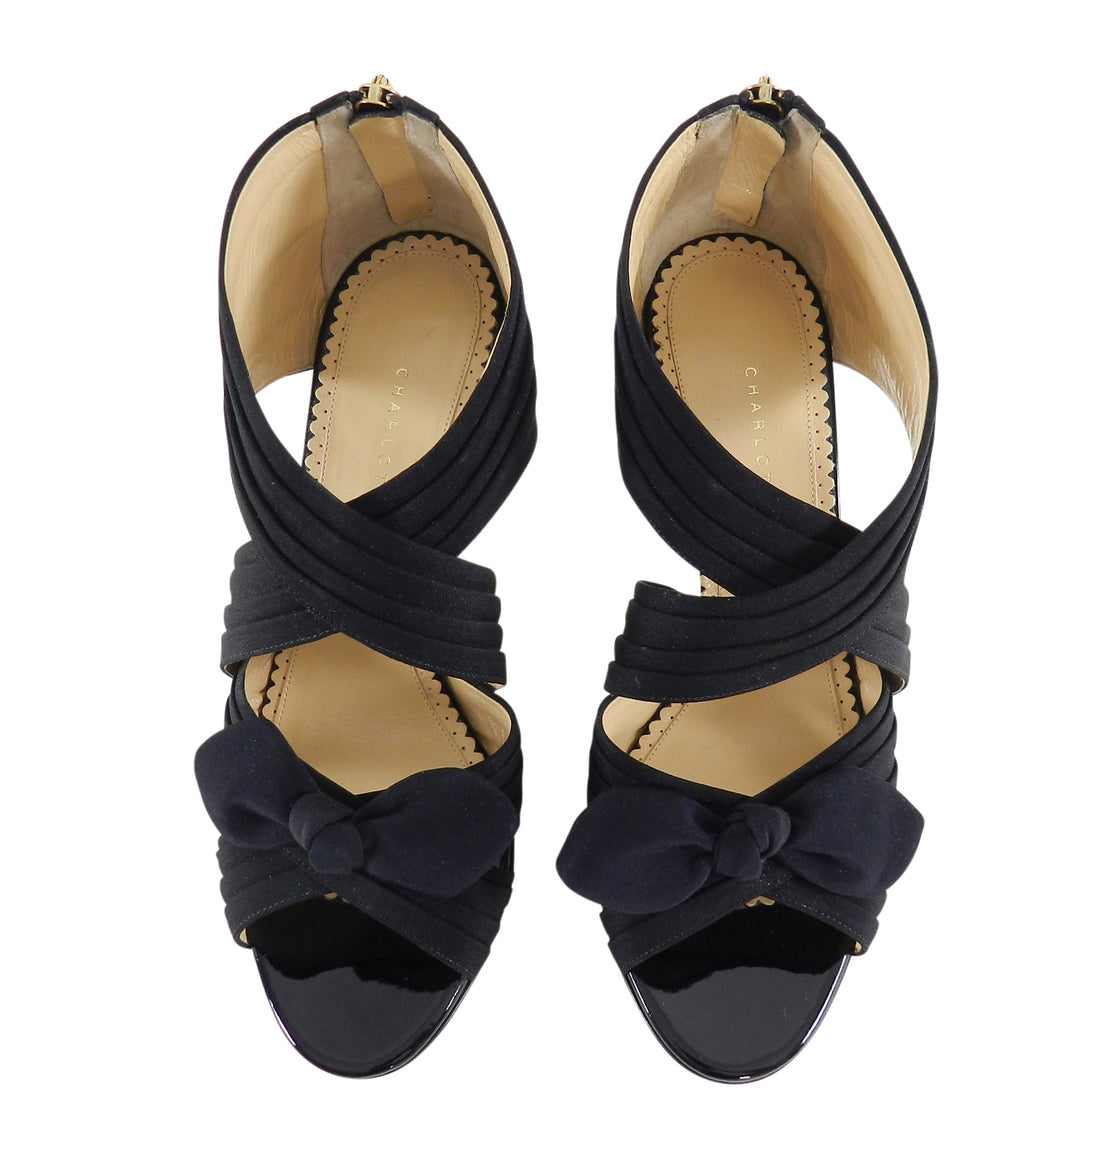 Charlotte Olympia Patricia Black Patent and Fabric Heels - 37.5